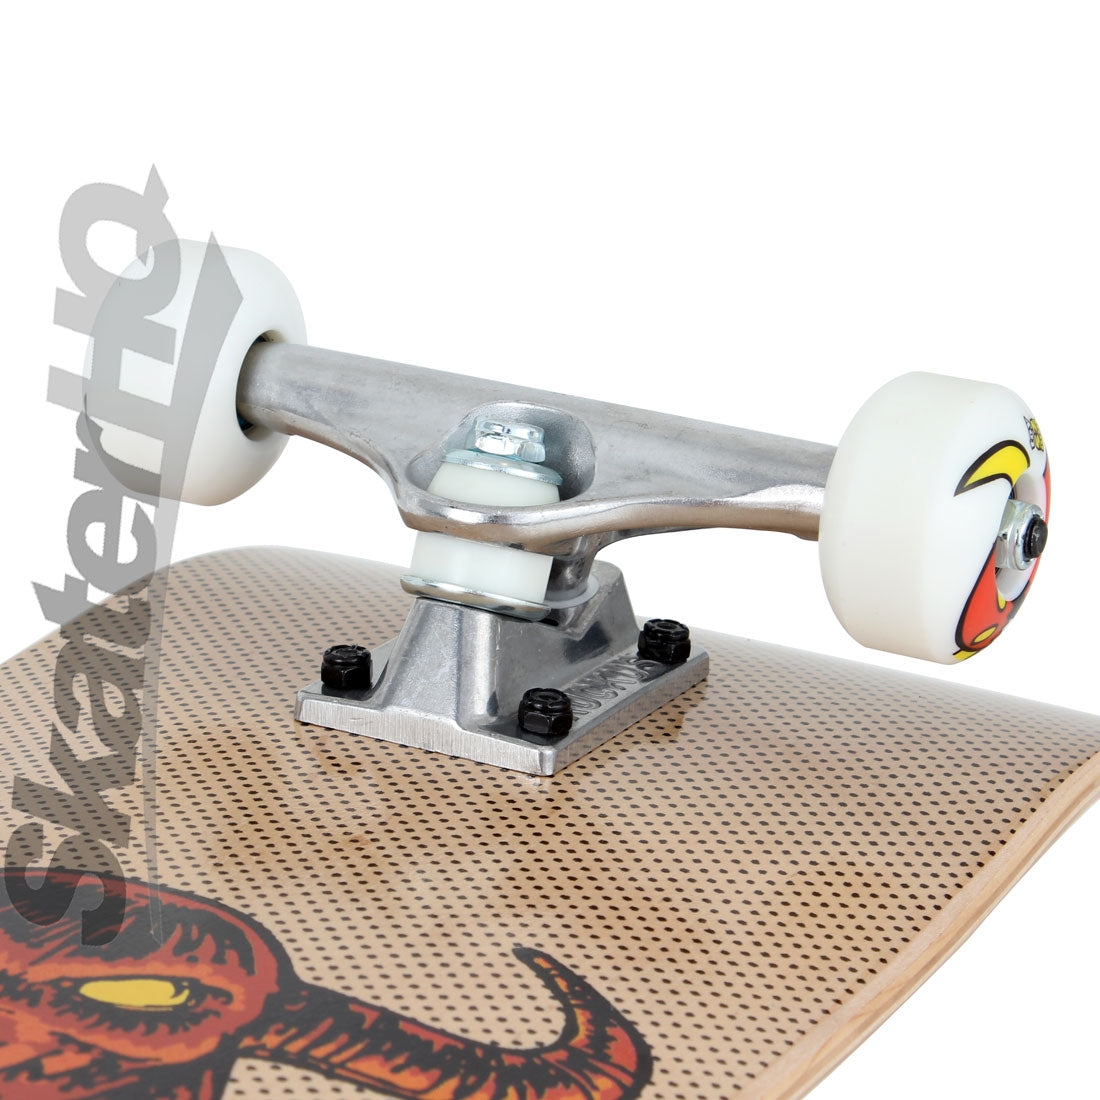 Toy Machine Hell Monster 8.25 Complete Skateboard Completes Modern Street